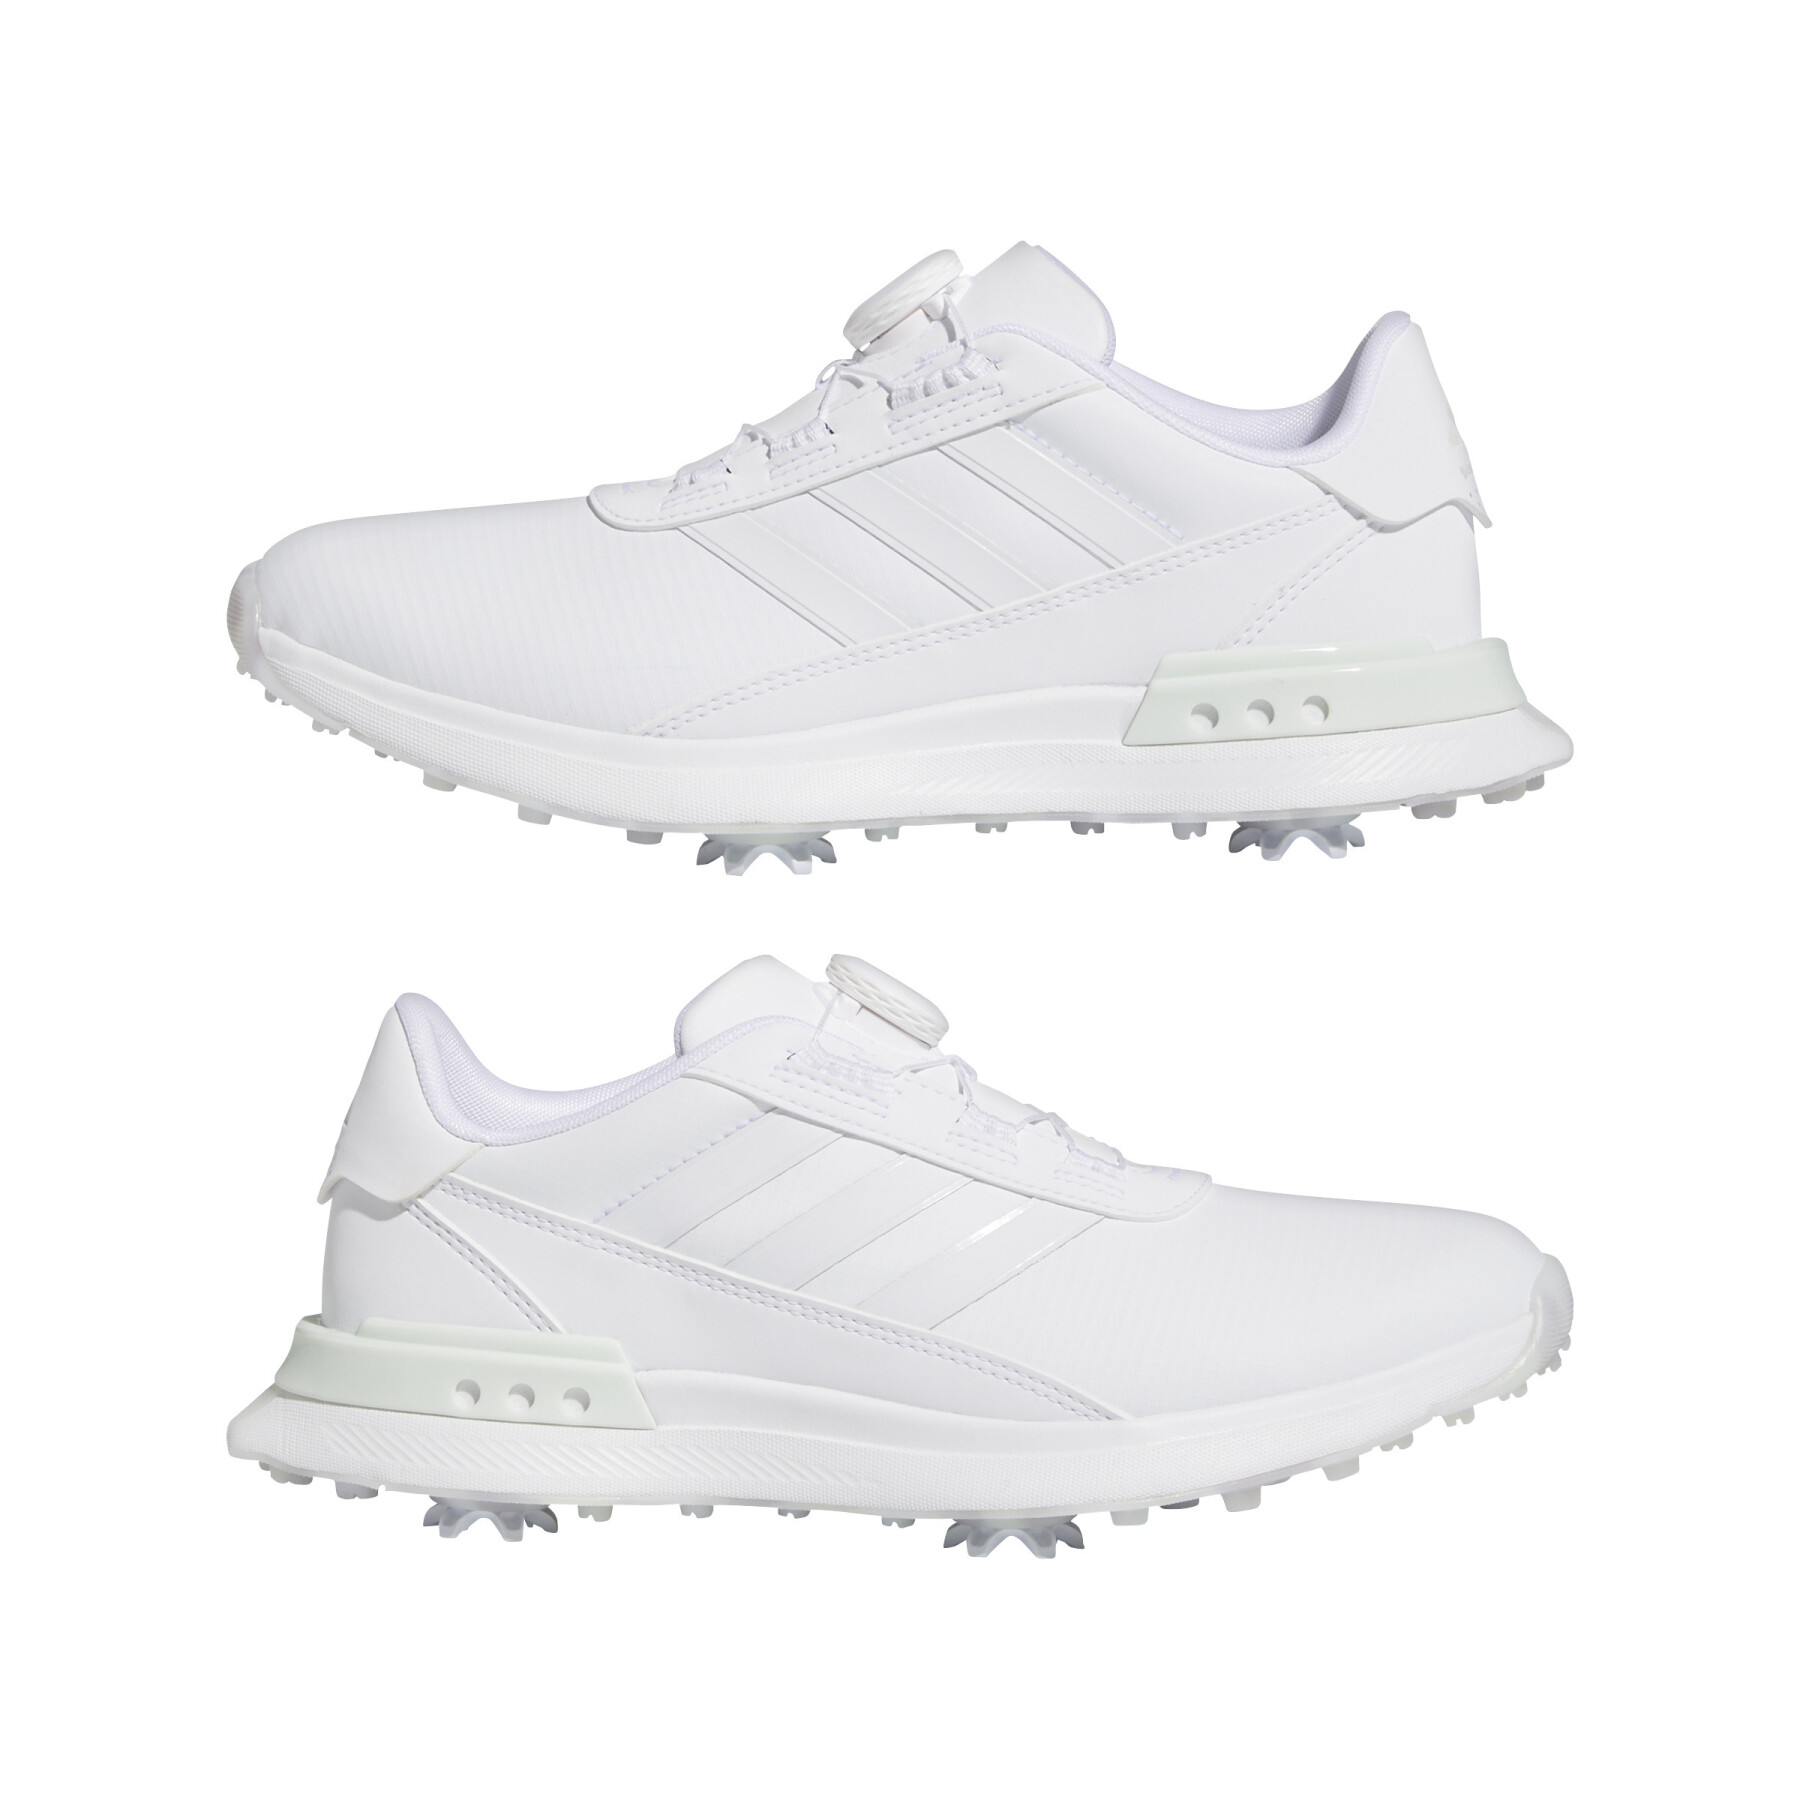 Women's spiked golf shoes adidas S2G BOA 24